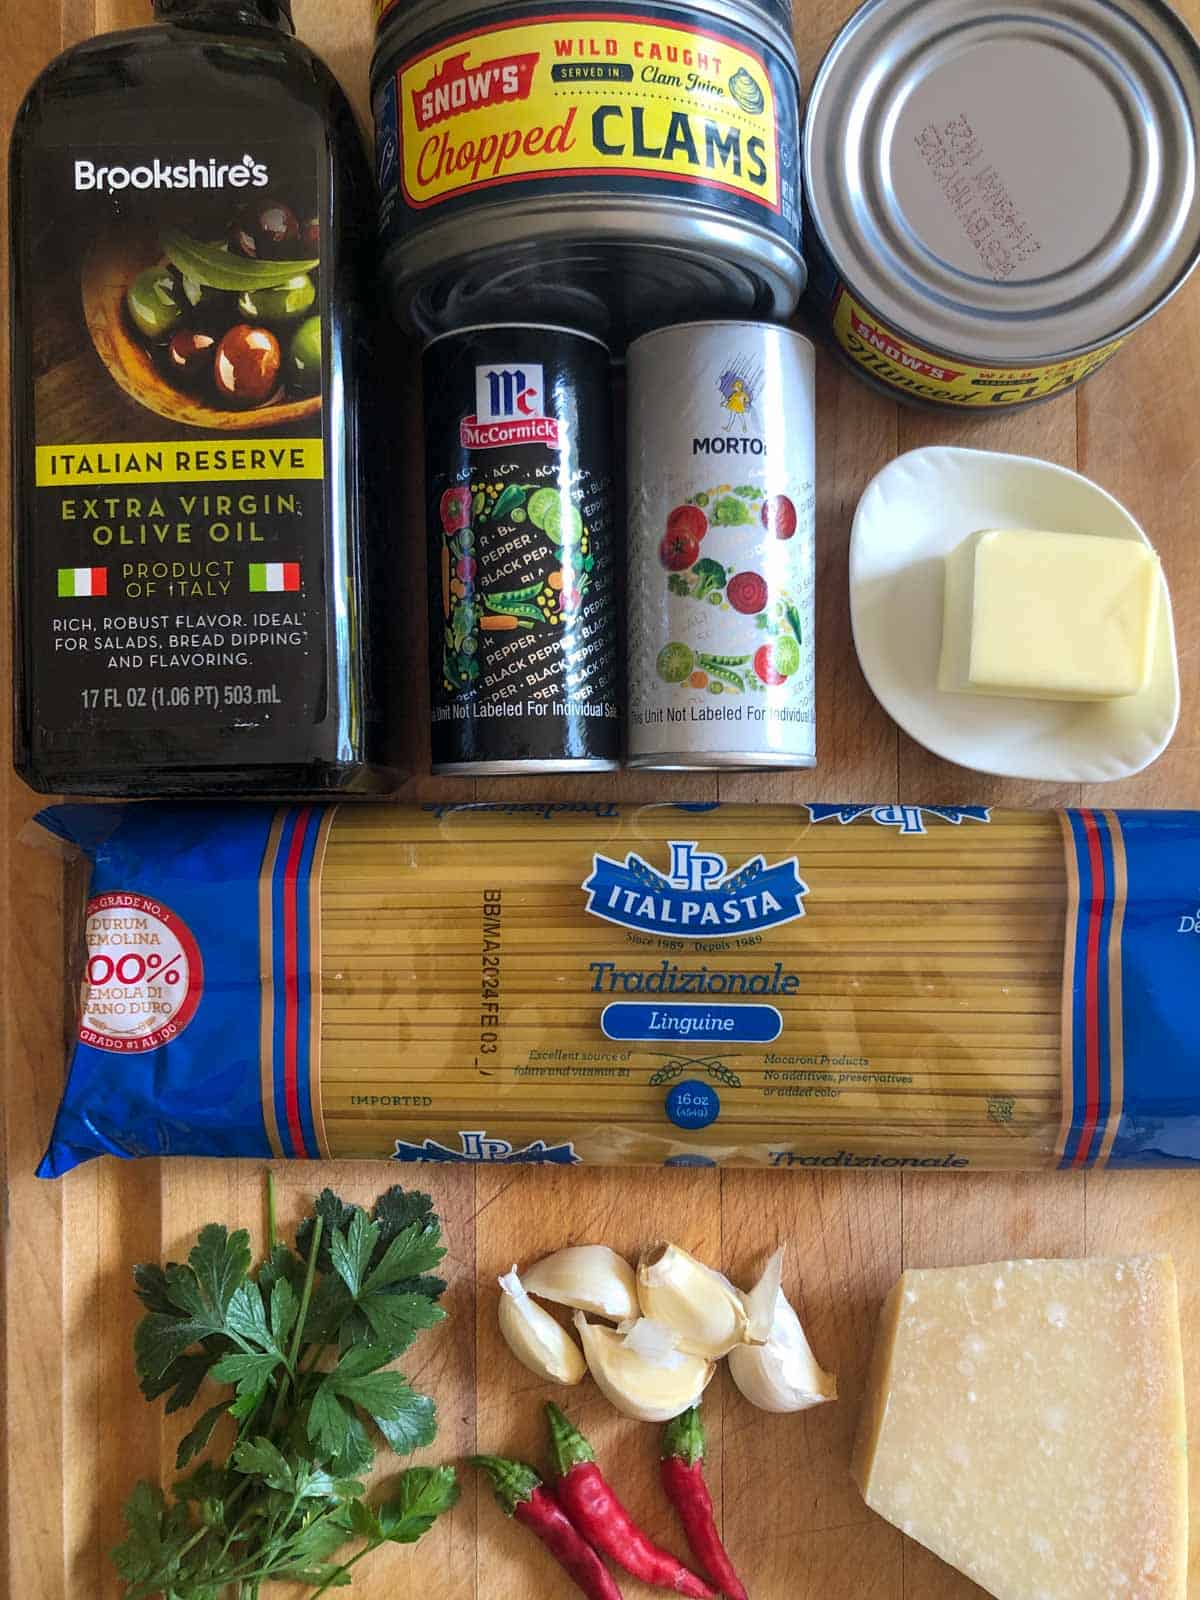 Bottle of olive oil, cans of chopped clams, salt and pepper shakers, butter on a white dish, package of linguine, Italian parsley, thai chilies, garlic, and a block of Parmesan cheese